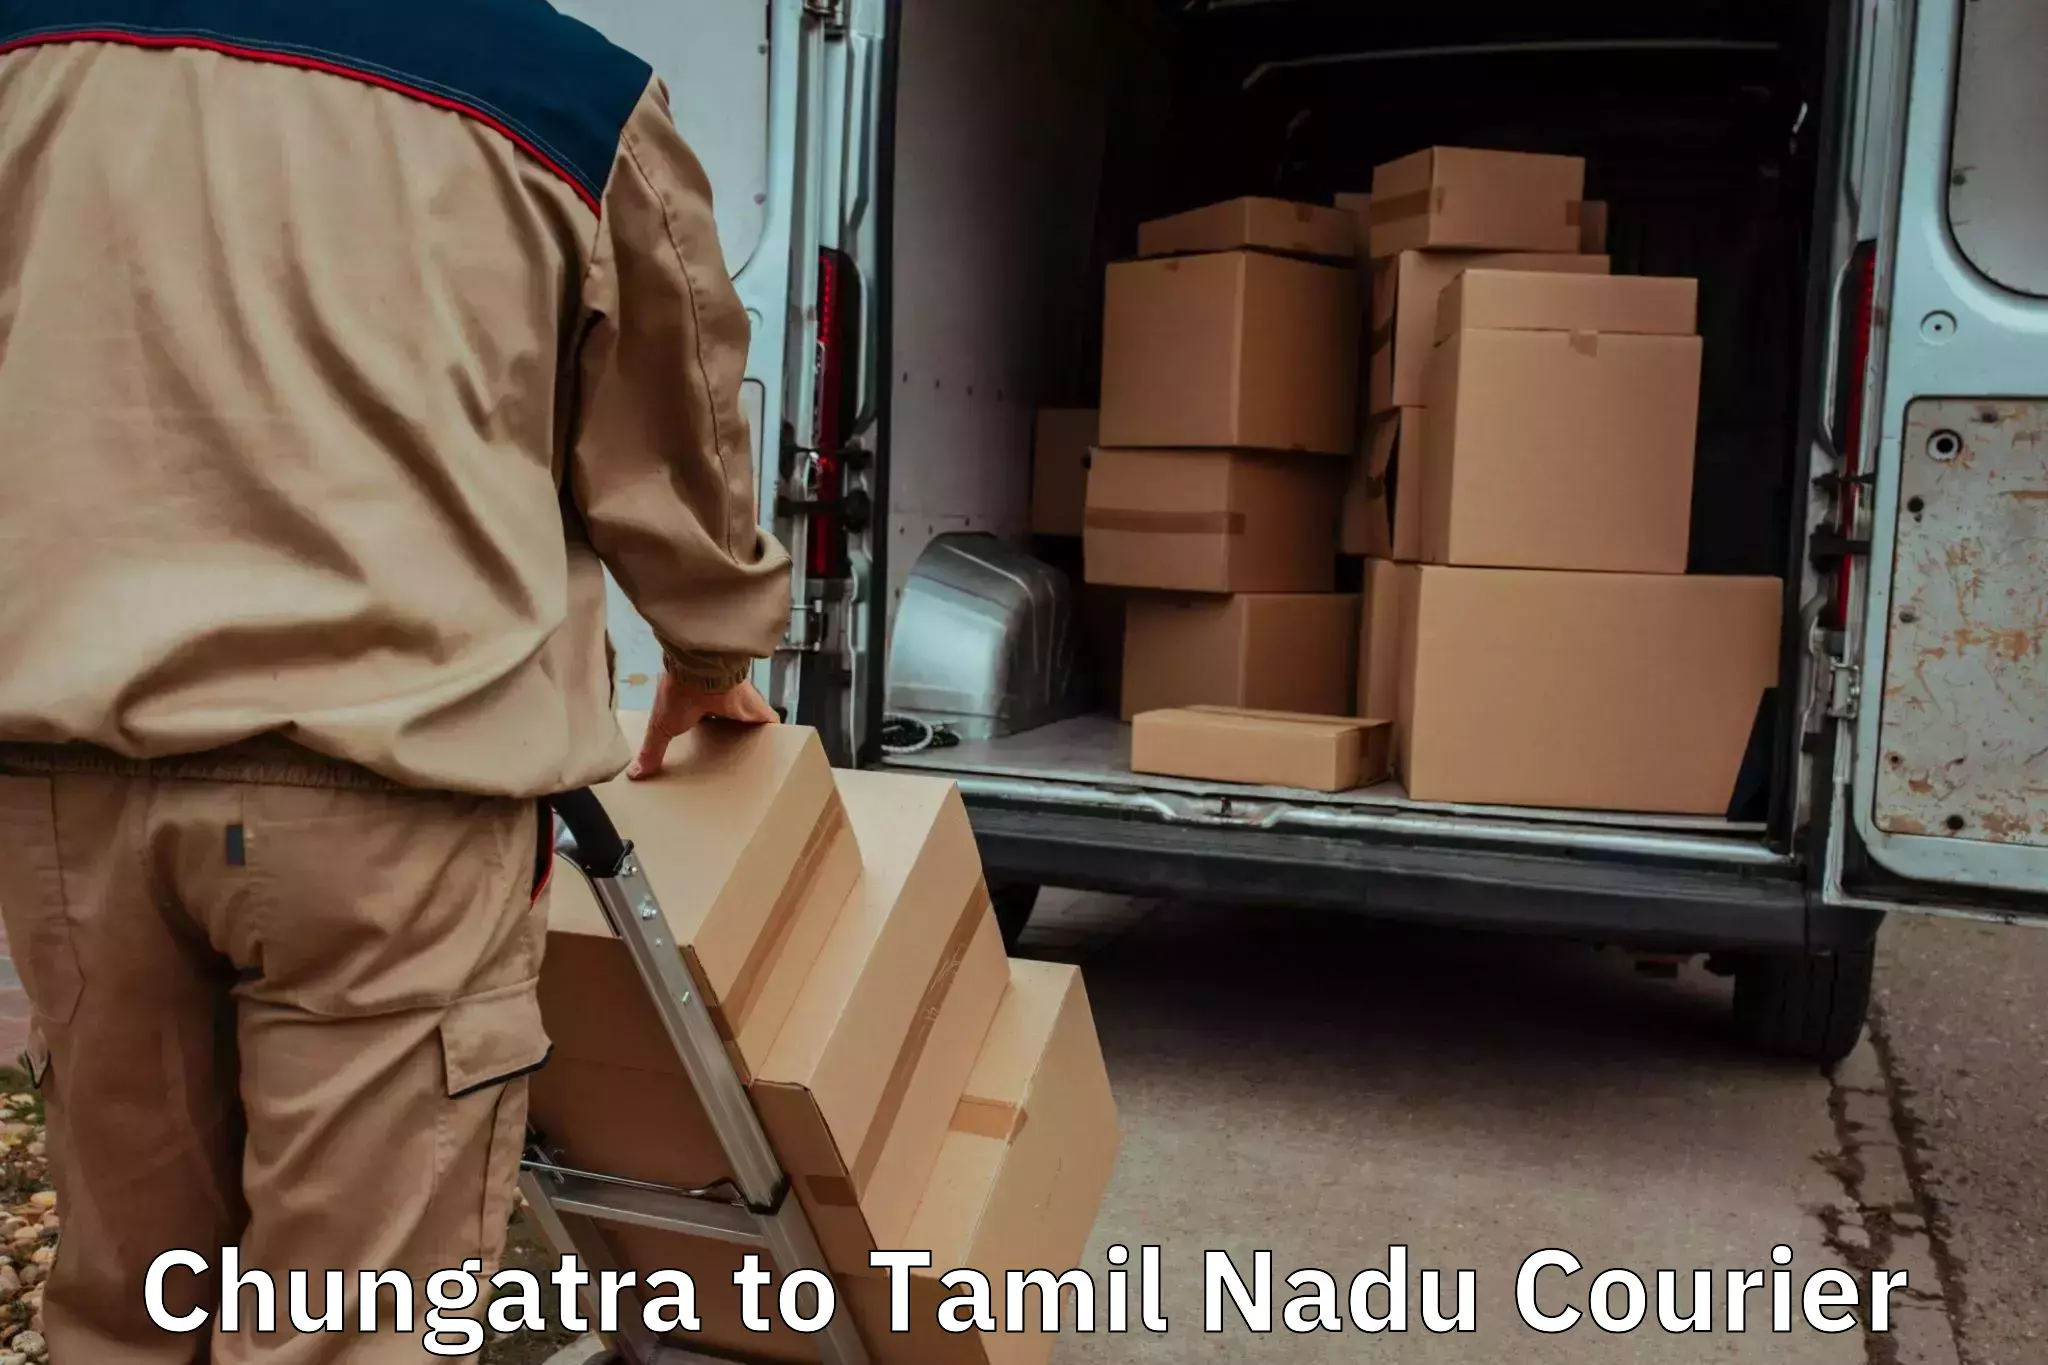 Specialized moving company Chungatra to Vriddhachalam